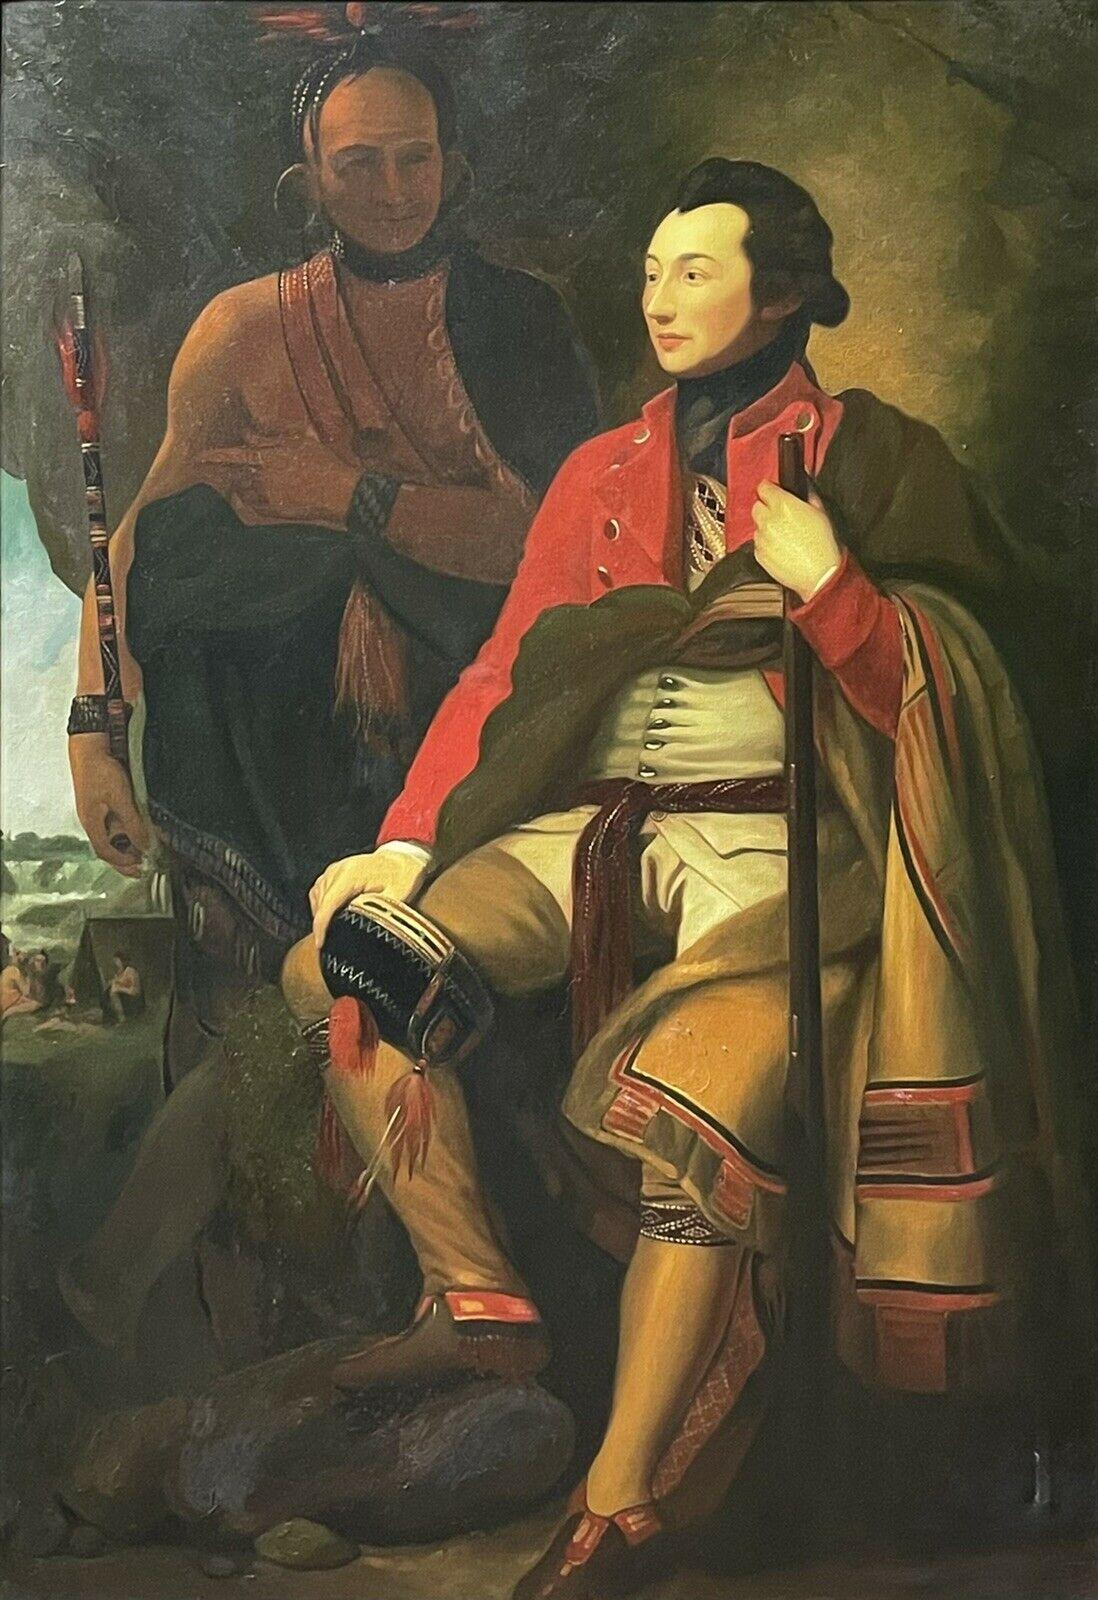 Unknown Portrait Painting - Huge Oil Painting Colonel Guy Johnson & Karonghyontye after Benjamin West